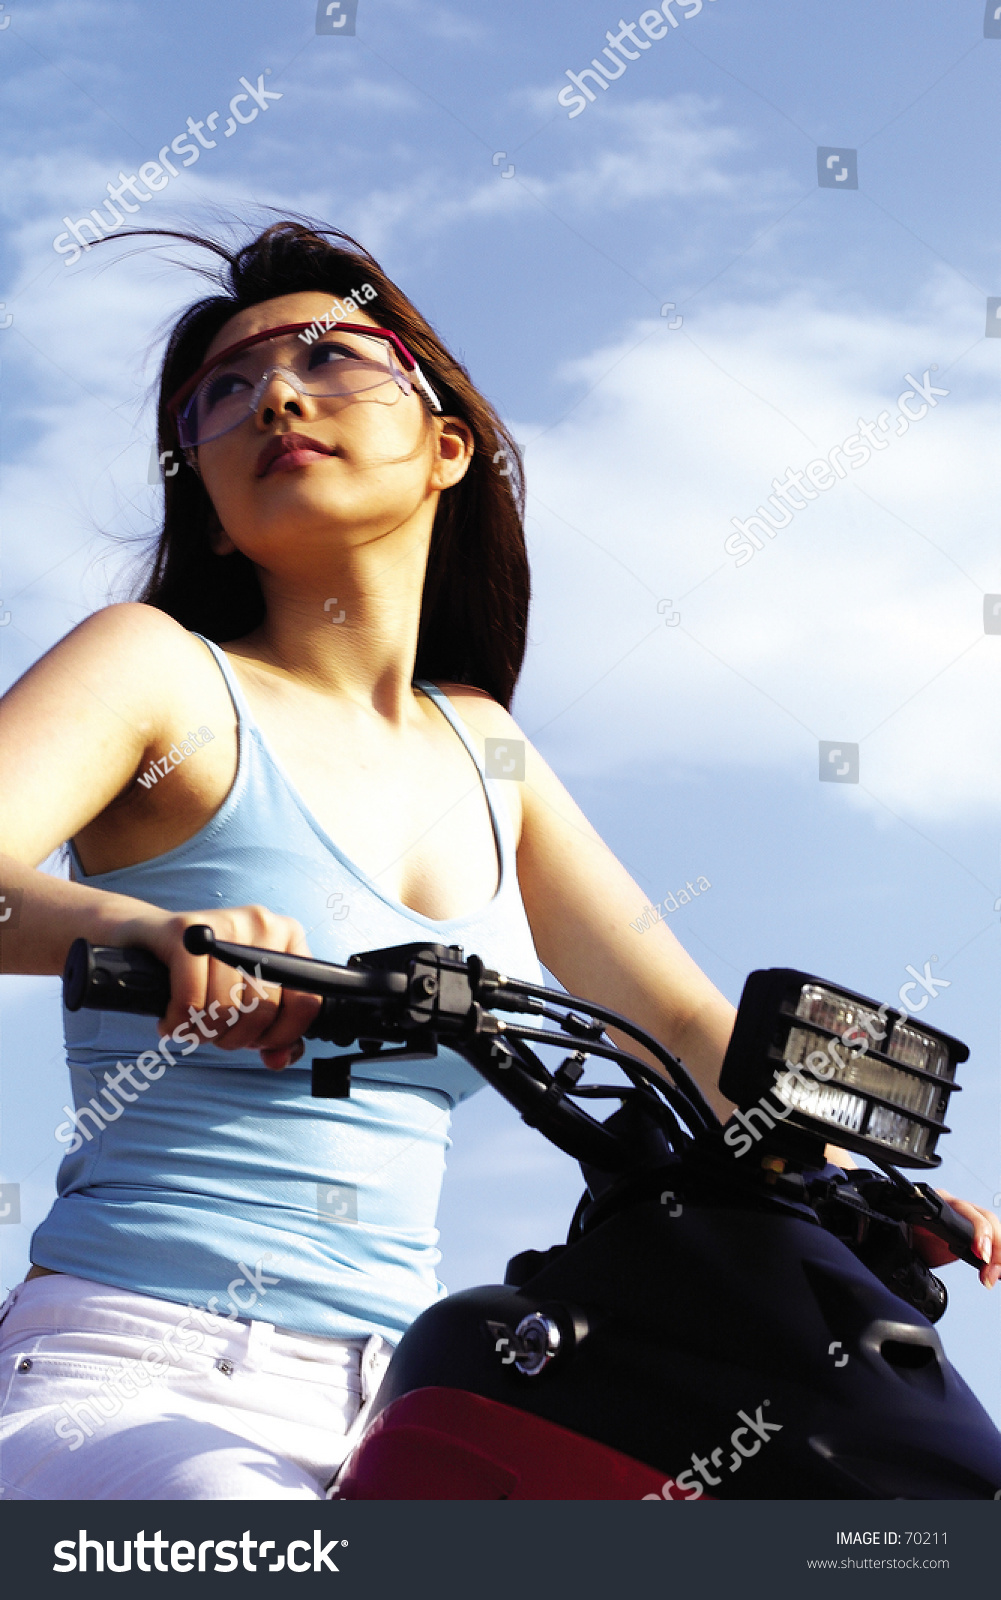 Hot asian girls on motorcycles - Adult gallery